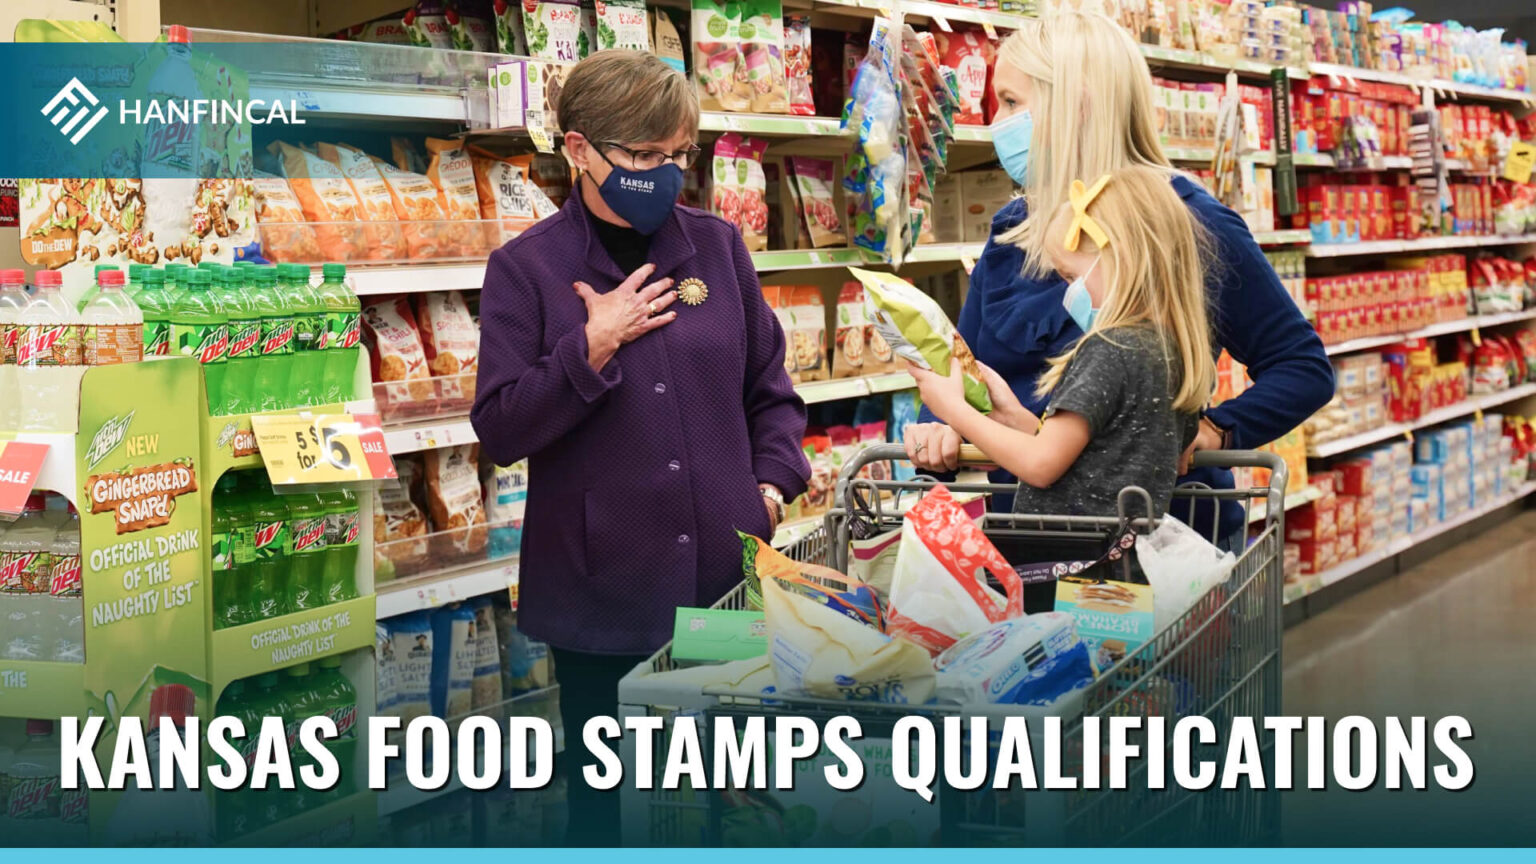 how-to-apply-for-food-stamps-in-kansas-02-2023-hanfincal